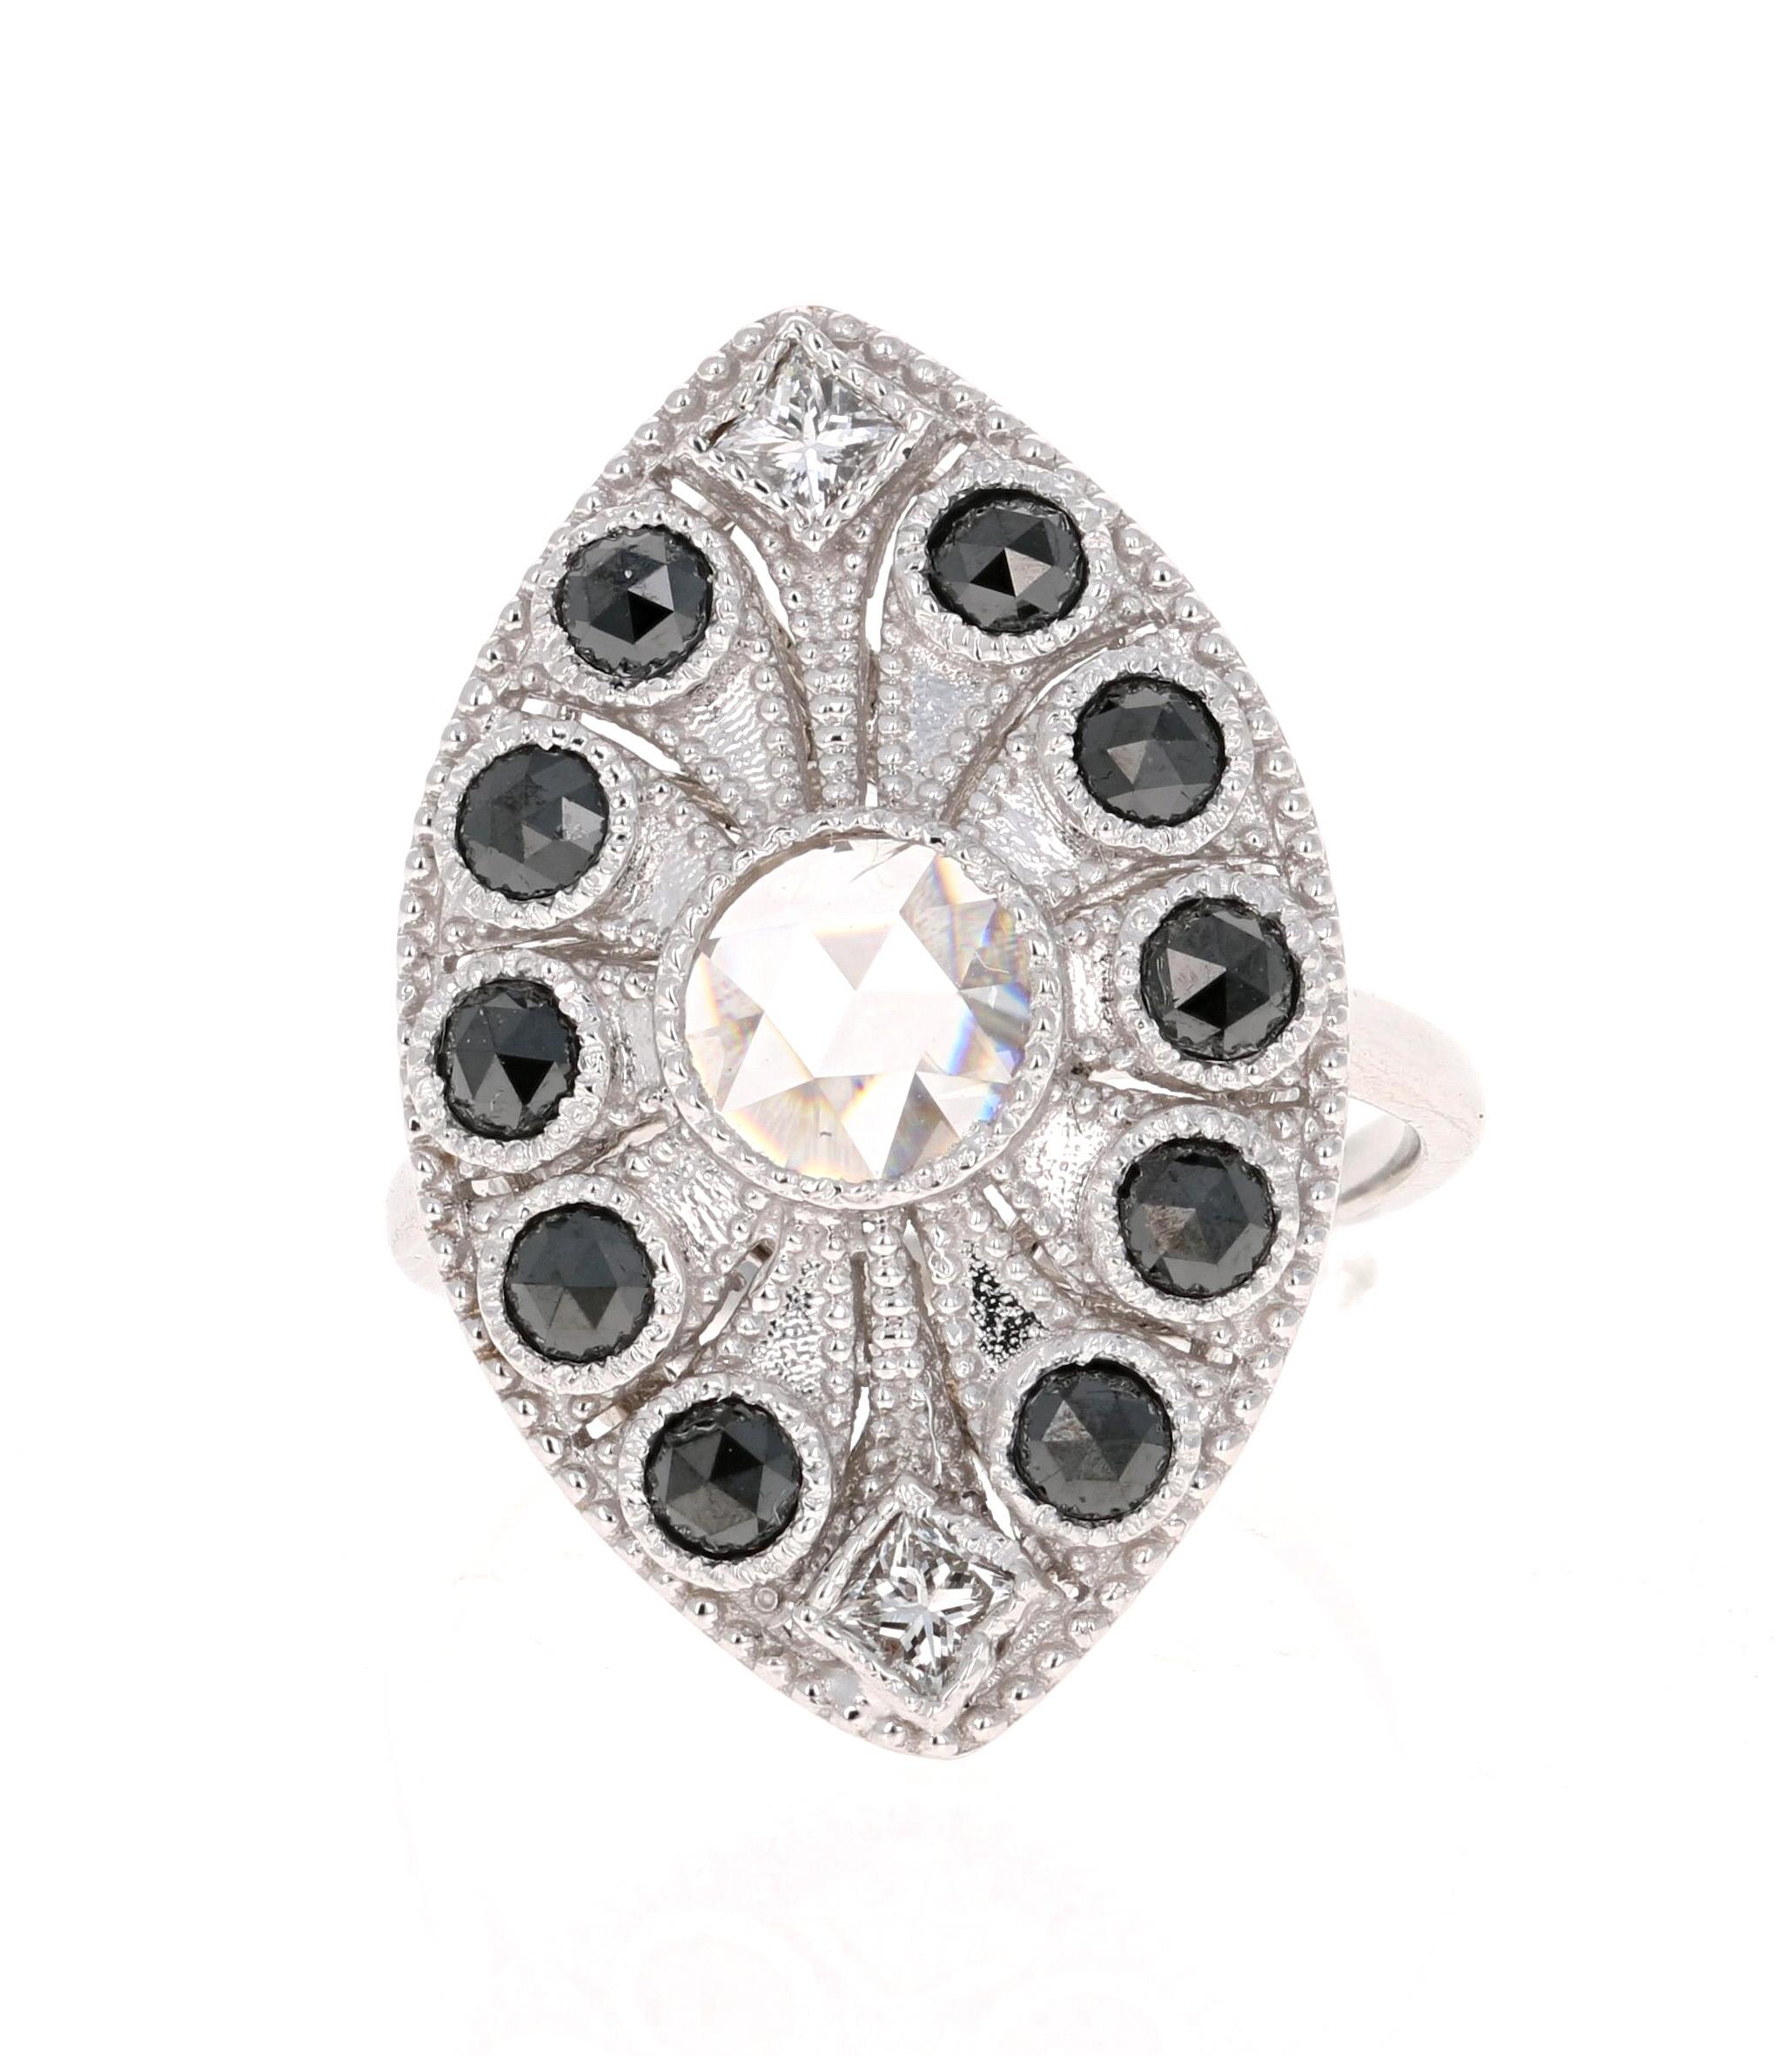 Simple yet Elegant.....This classic design is going to elevate your accessory wardrobe! Use it as a cocktail ring or as a daily statement ring! 
The design of this ring is inspired from the Art Deco period but the use of Black Diamonds along with